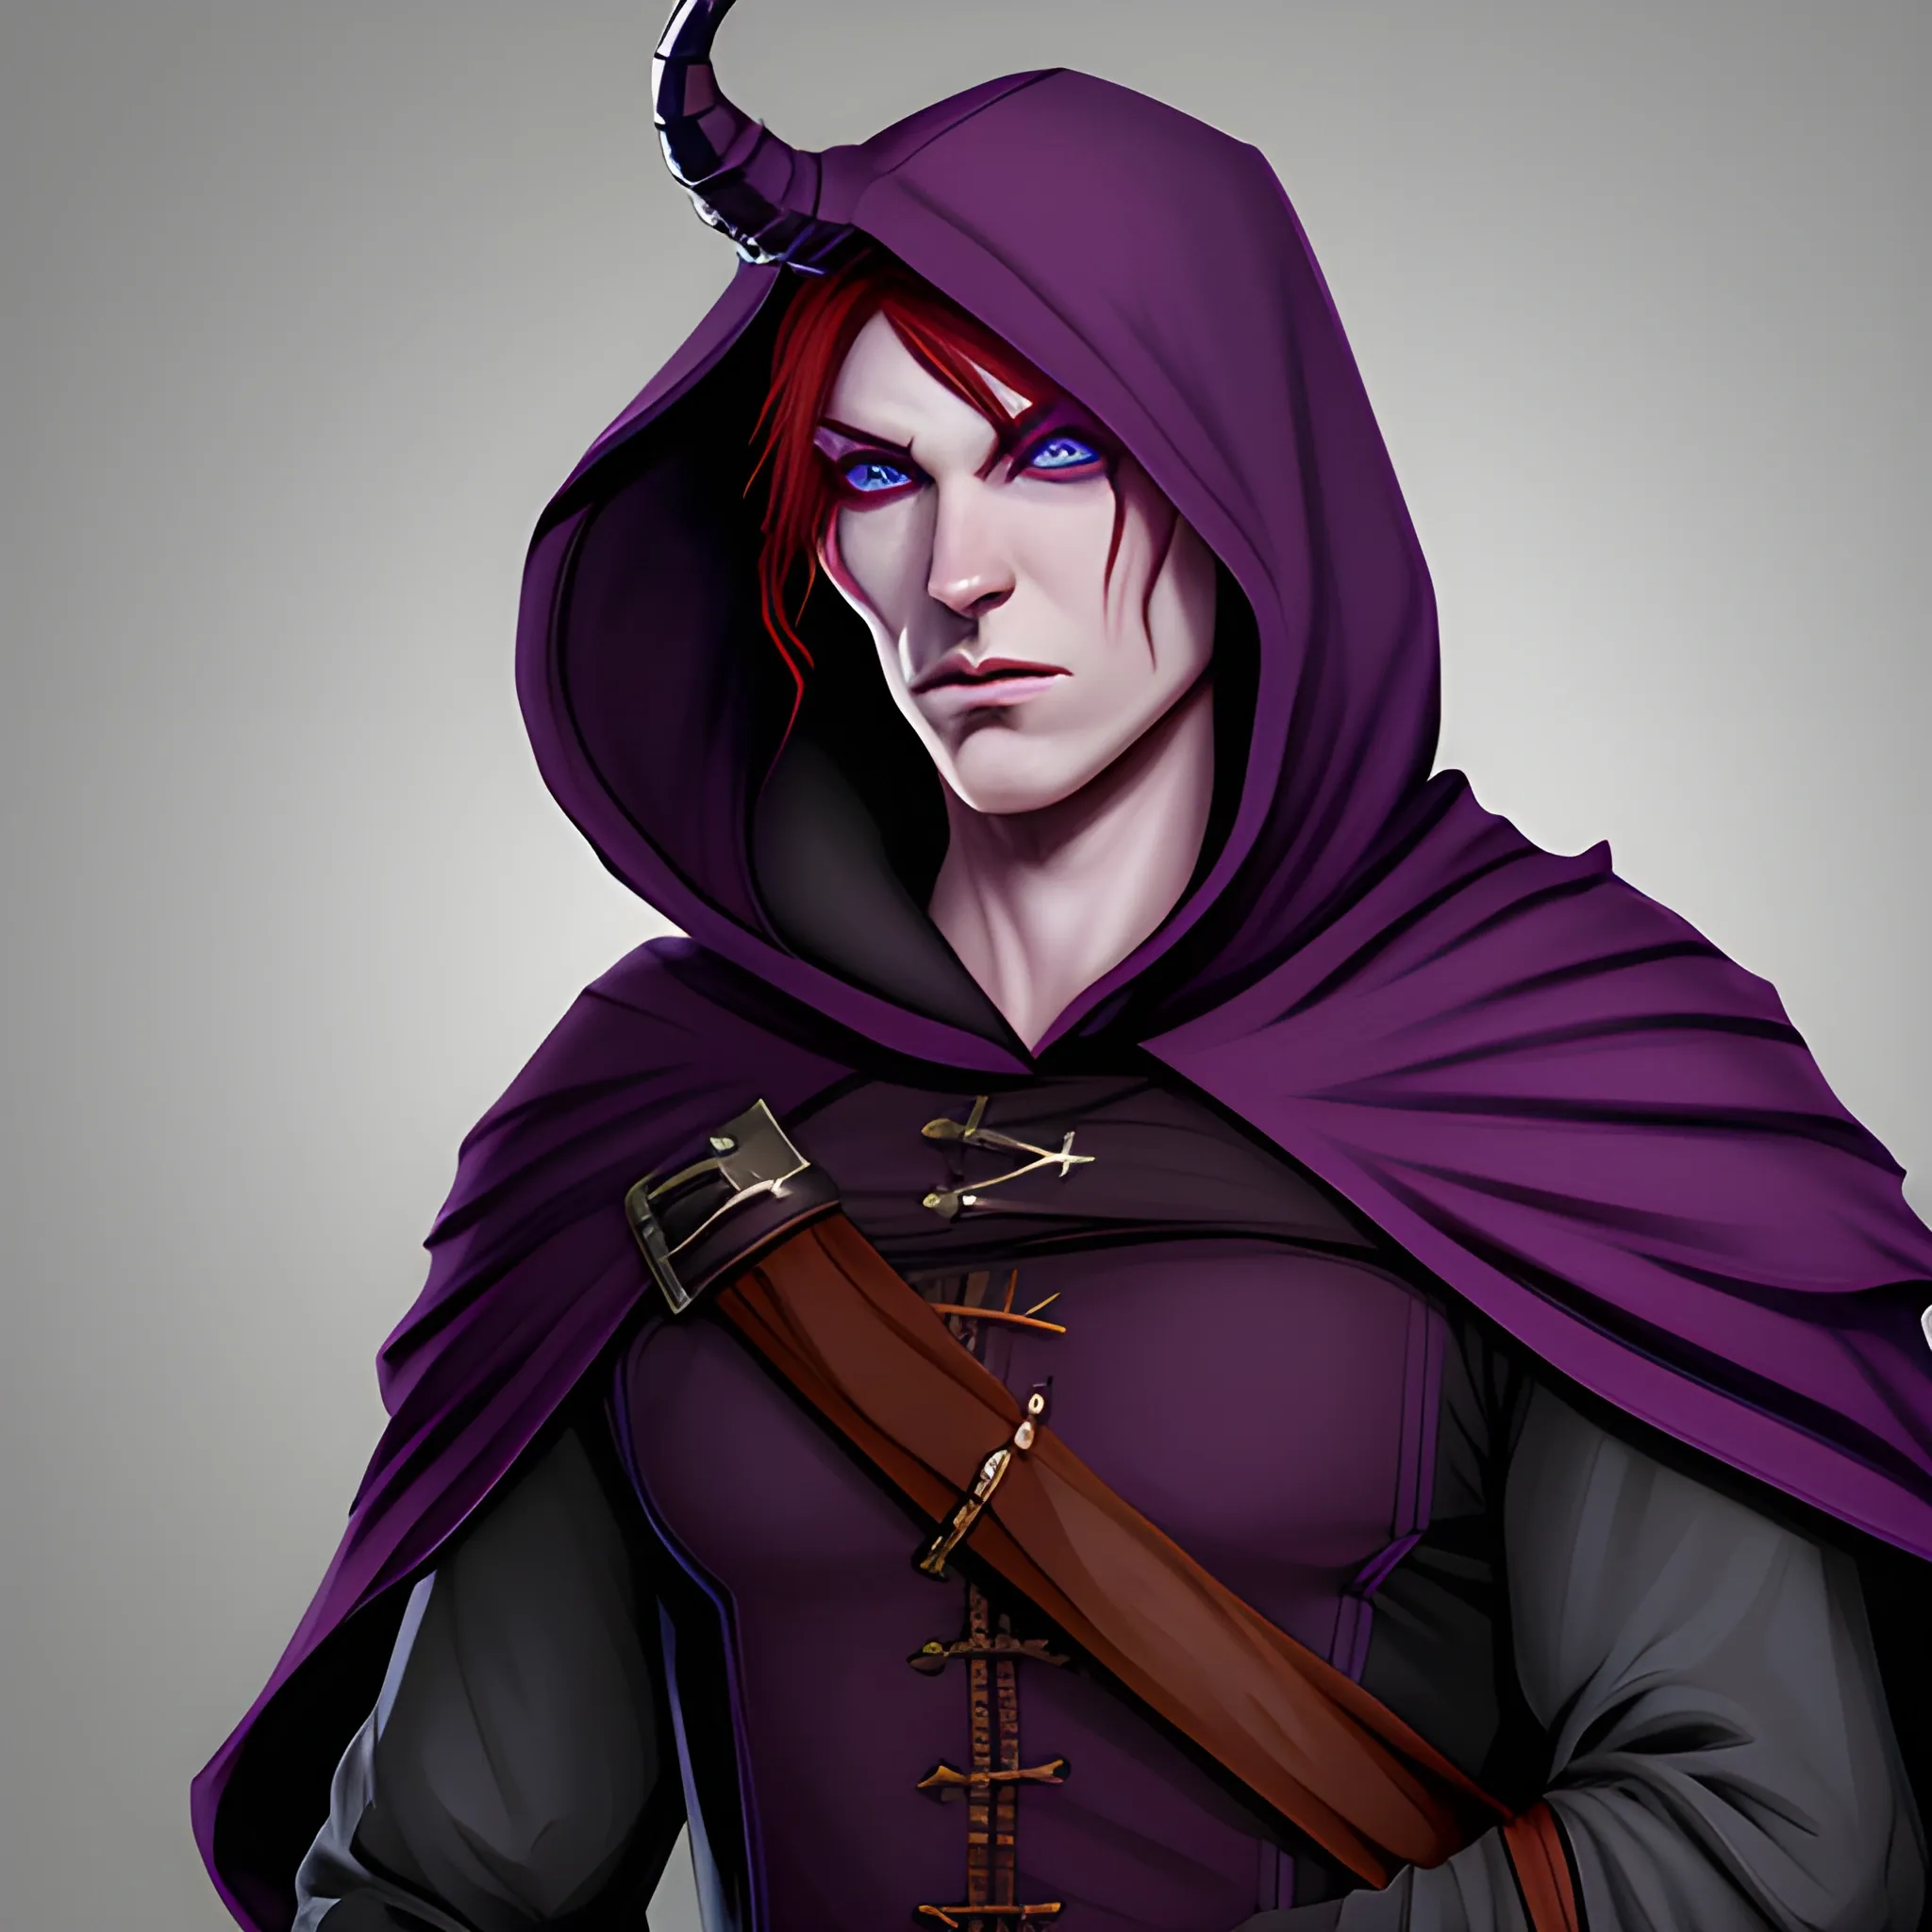 A dark clothed hooded gaunt male Tiefling rogue, with  pale purple skin complexion and red hair